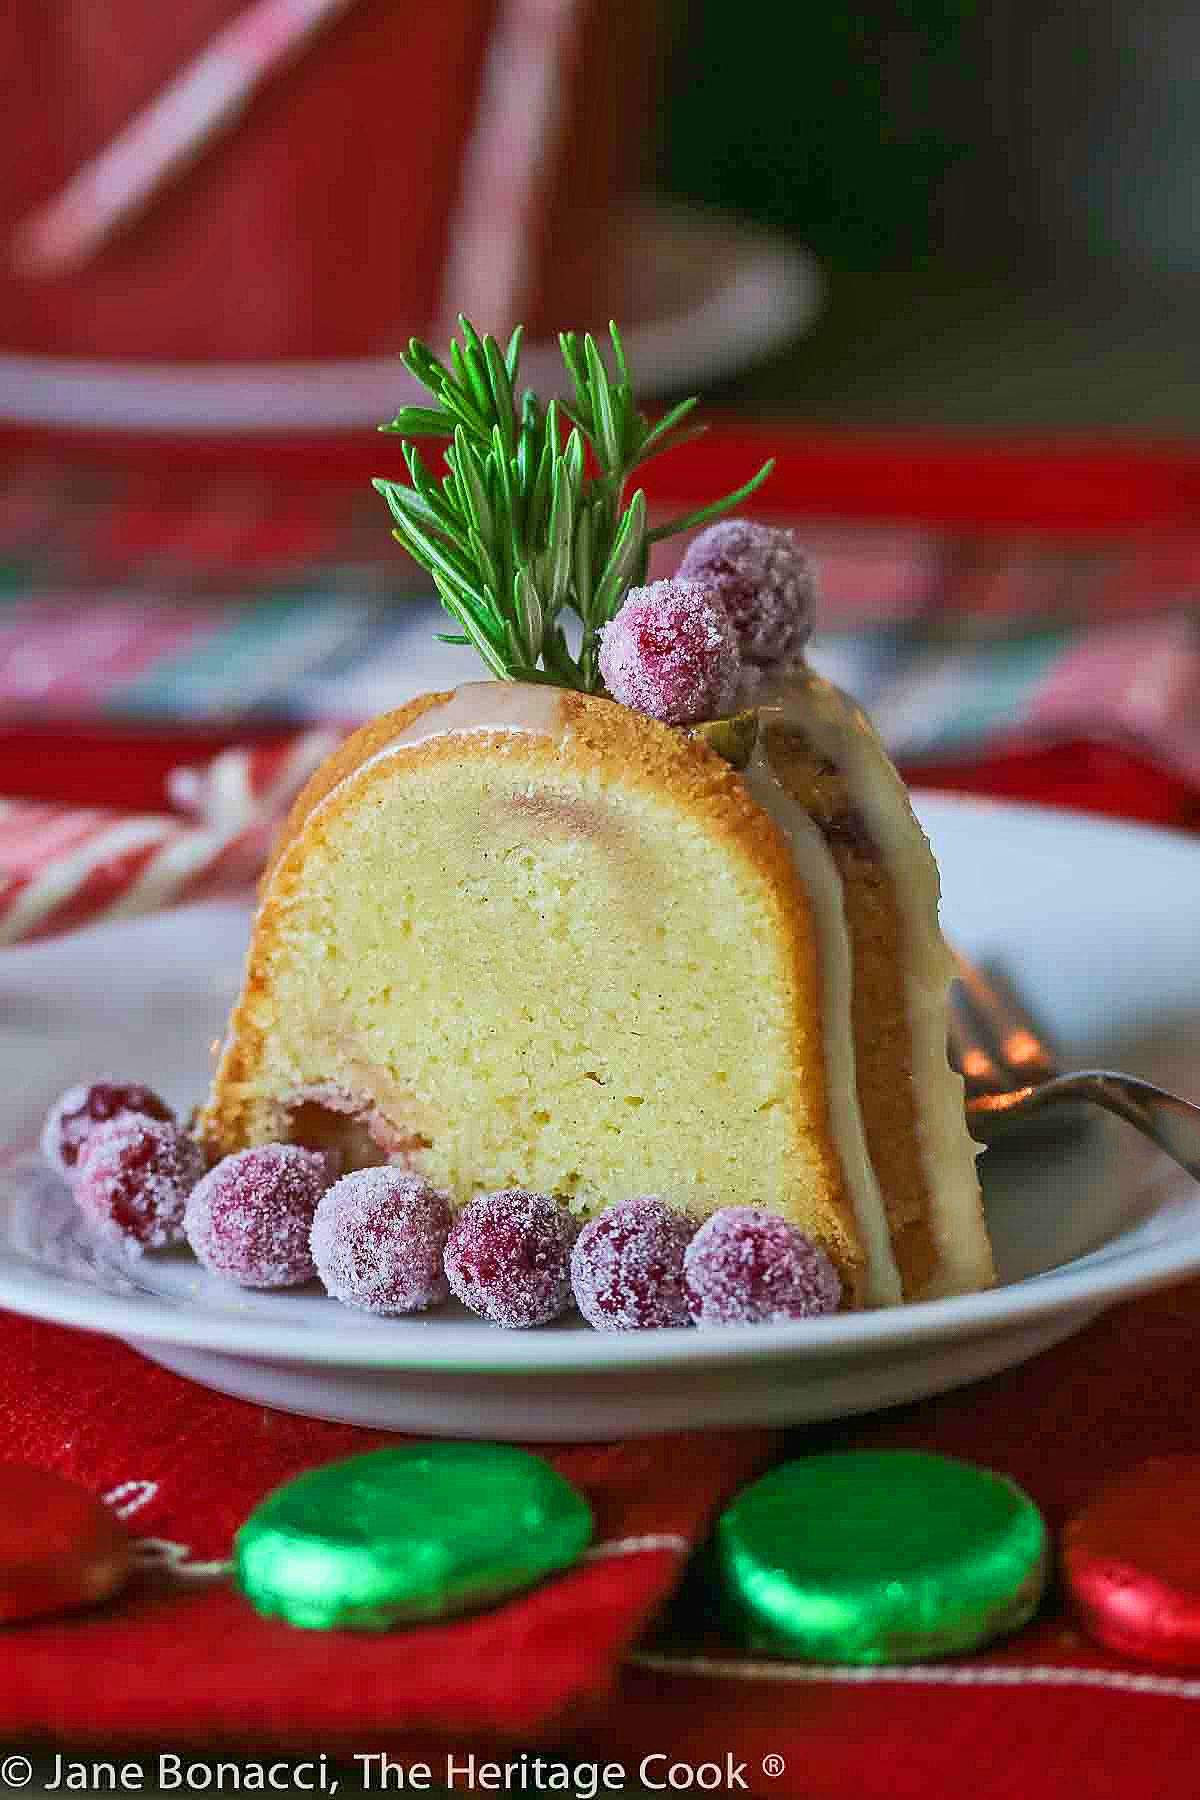 Whole decorated cake with glaze and sugared cranberries and a cut slice on white plates sitting on red cloths with a festive plaid cloth in the back. Some chocolate candies & candy canes around the plates © 2023 Jane Bonacci, The Heritage Cook.